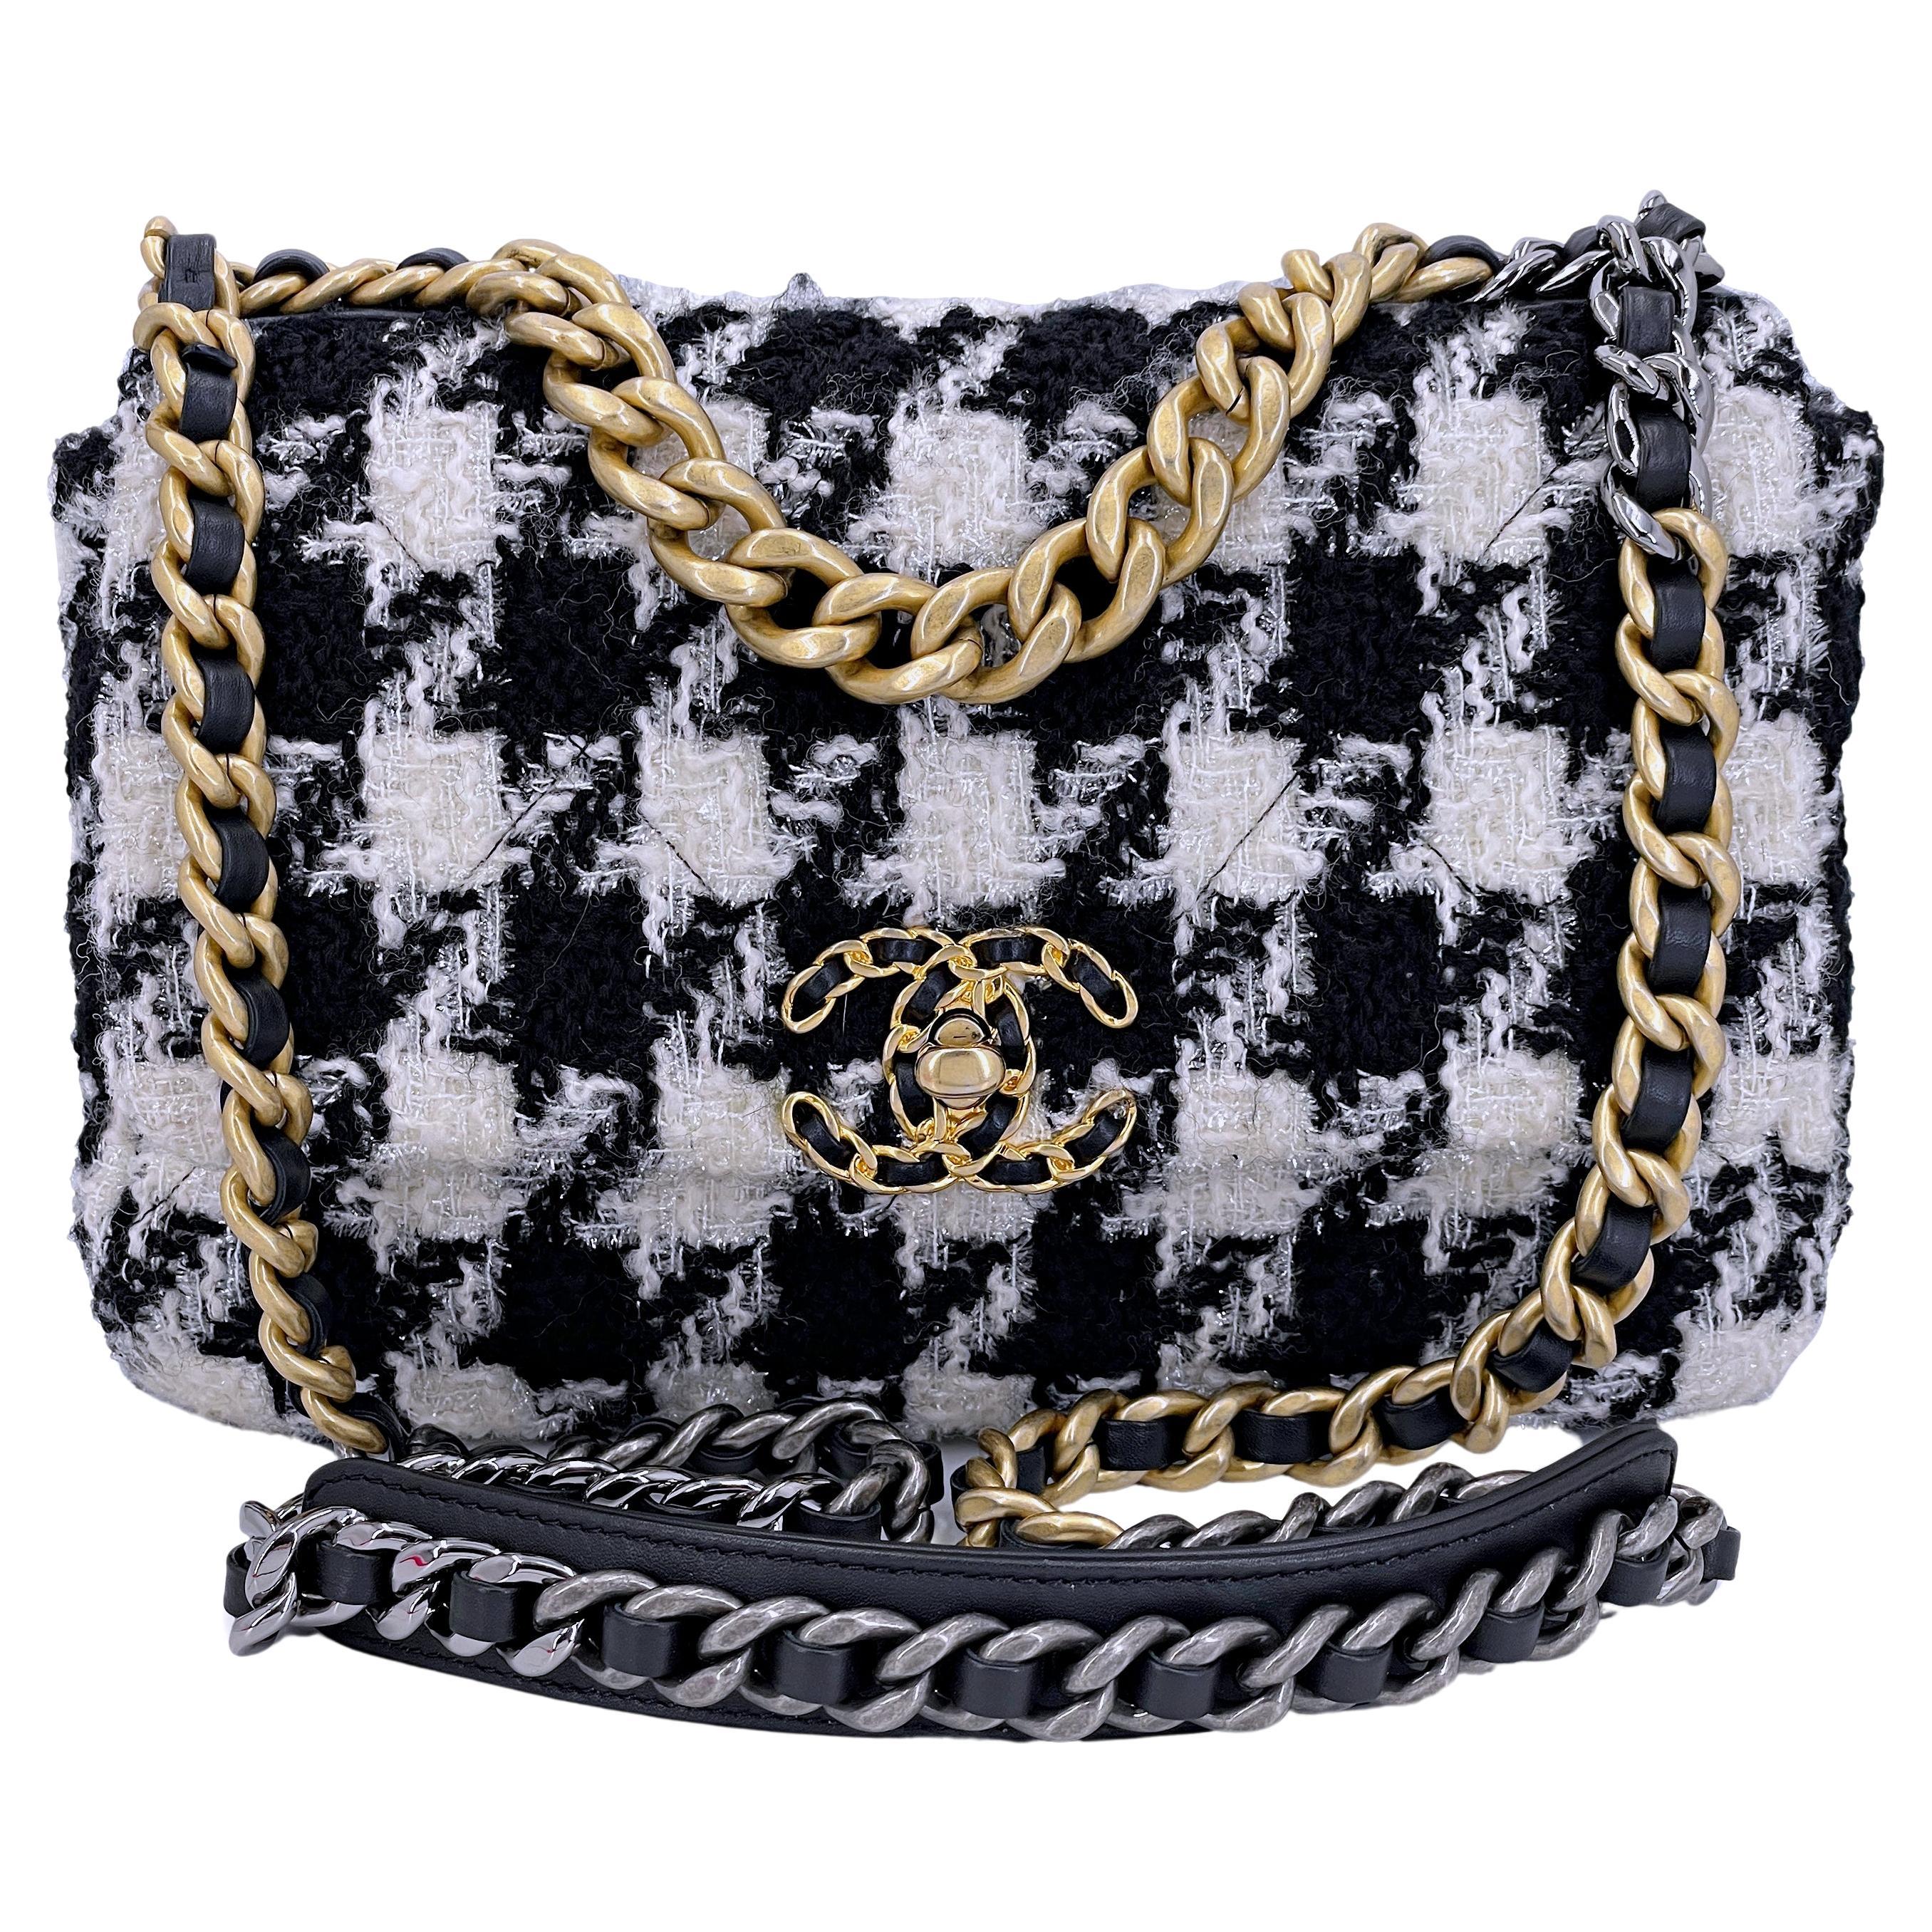 Chanel 19 Jumbo, Beige and Black Houndstooth Tweed, Preowned in